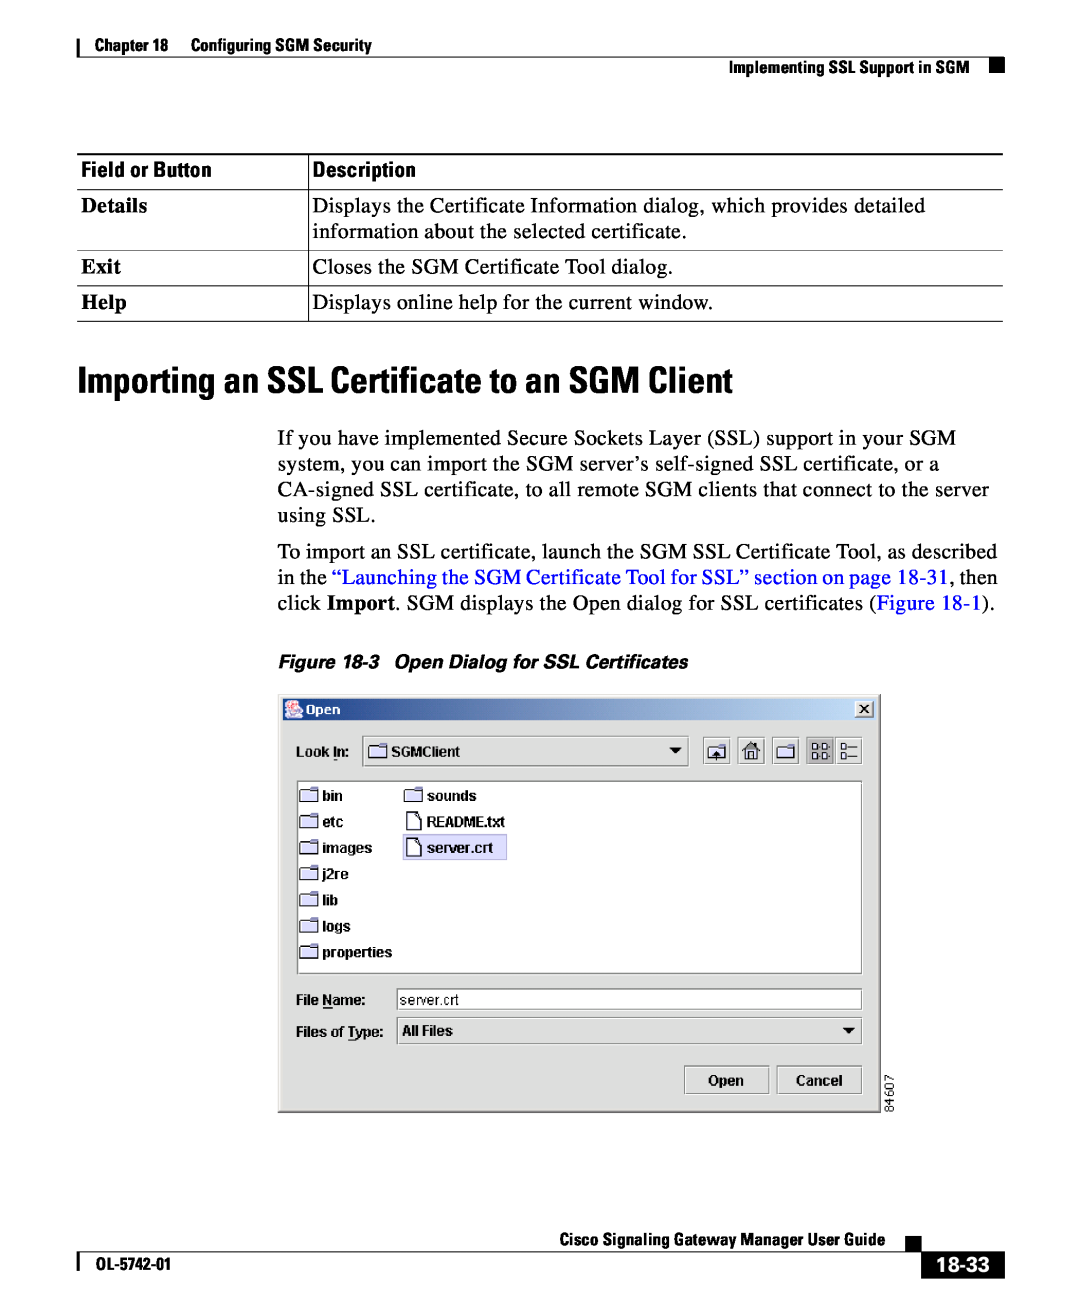 Cisco Systems OL-5742-01 manual Importing an SSL Certificate to an SGM Client, Details, Exit, Help, 18-33, Field or Button 